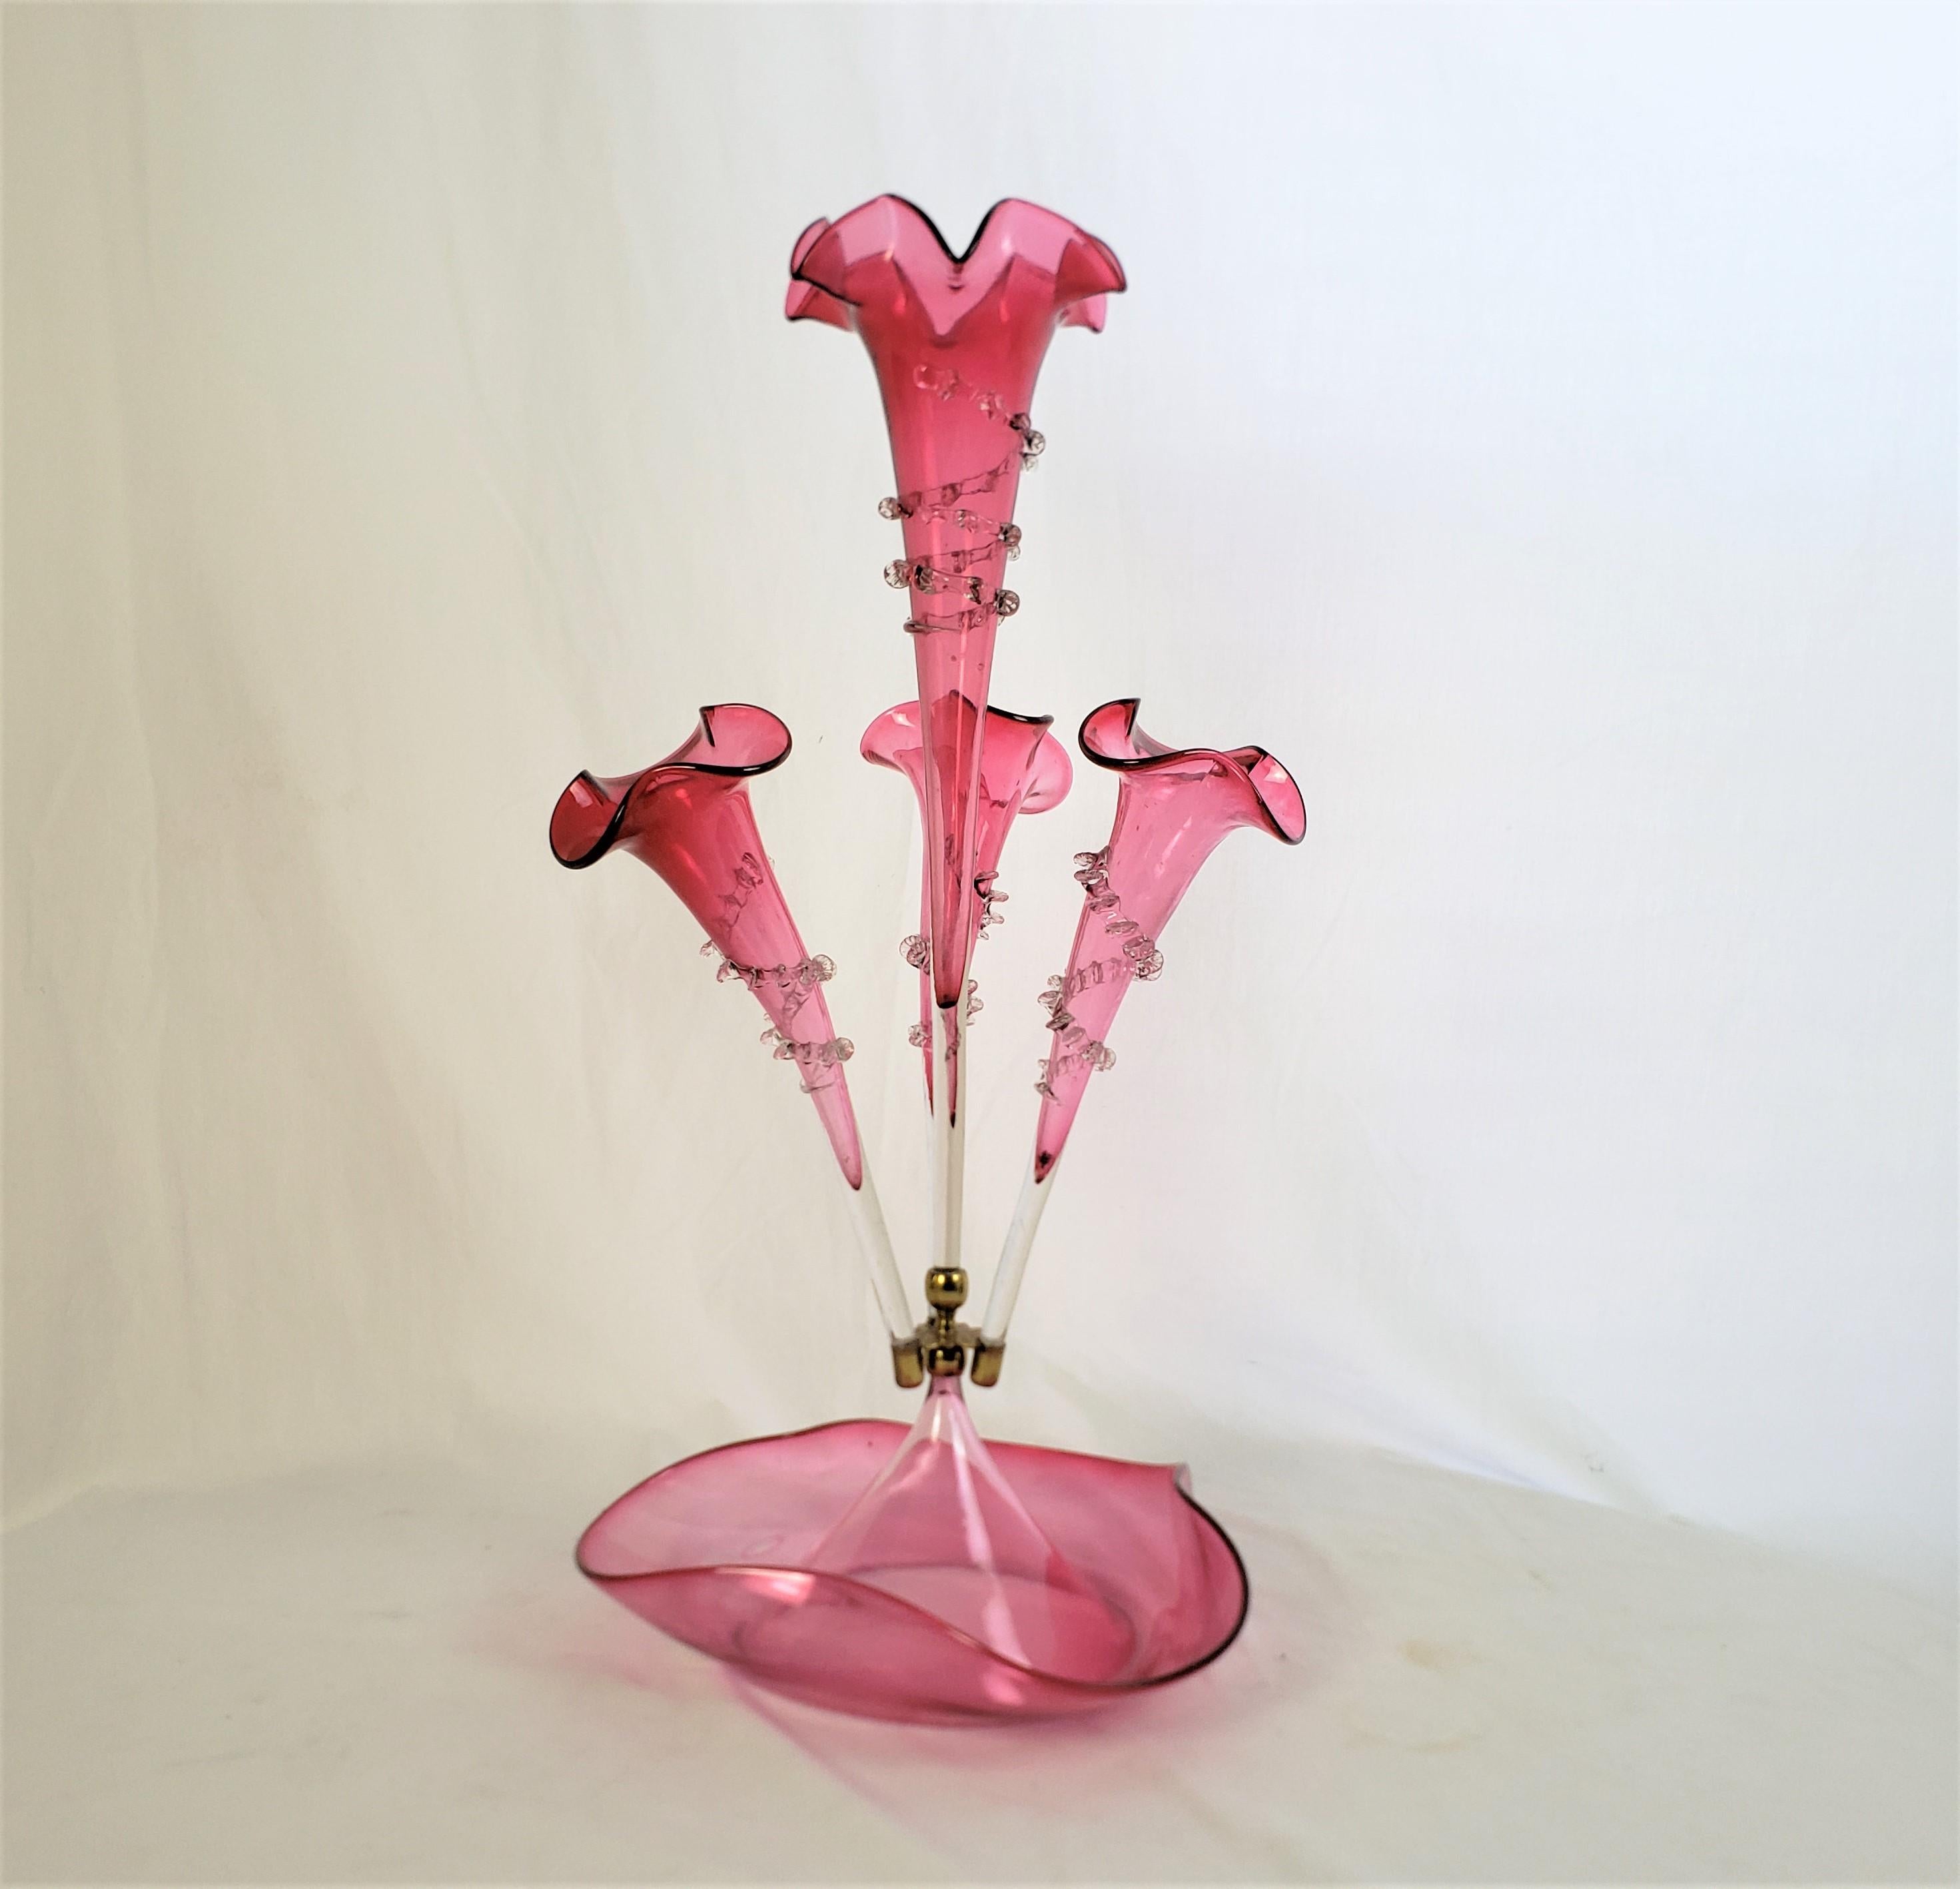 This antique epergne is unsigned, but presumed to have originated from England and date to approximately 1880 and done in the period Victorian style. The epergne is done in a deep cranberry glass with one large central trumpet vase which screws into